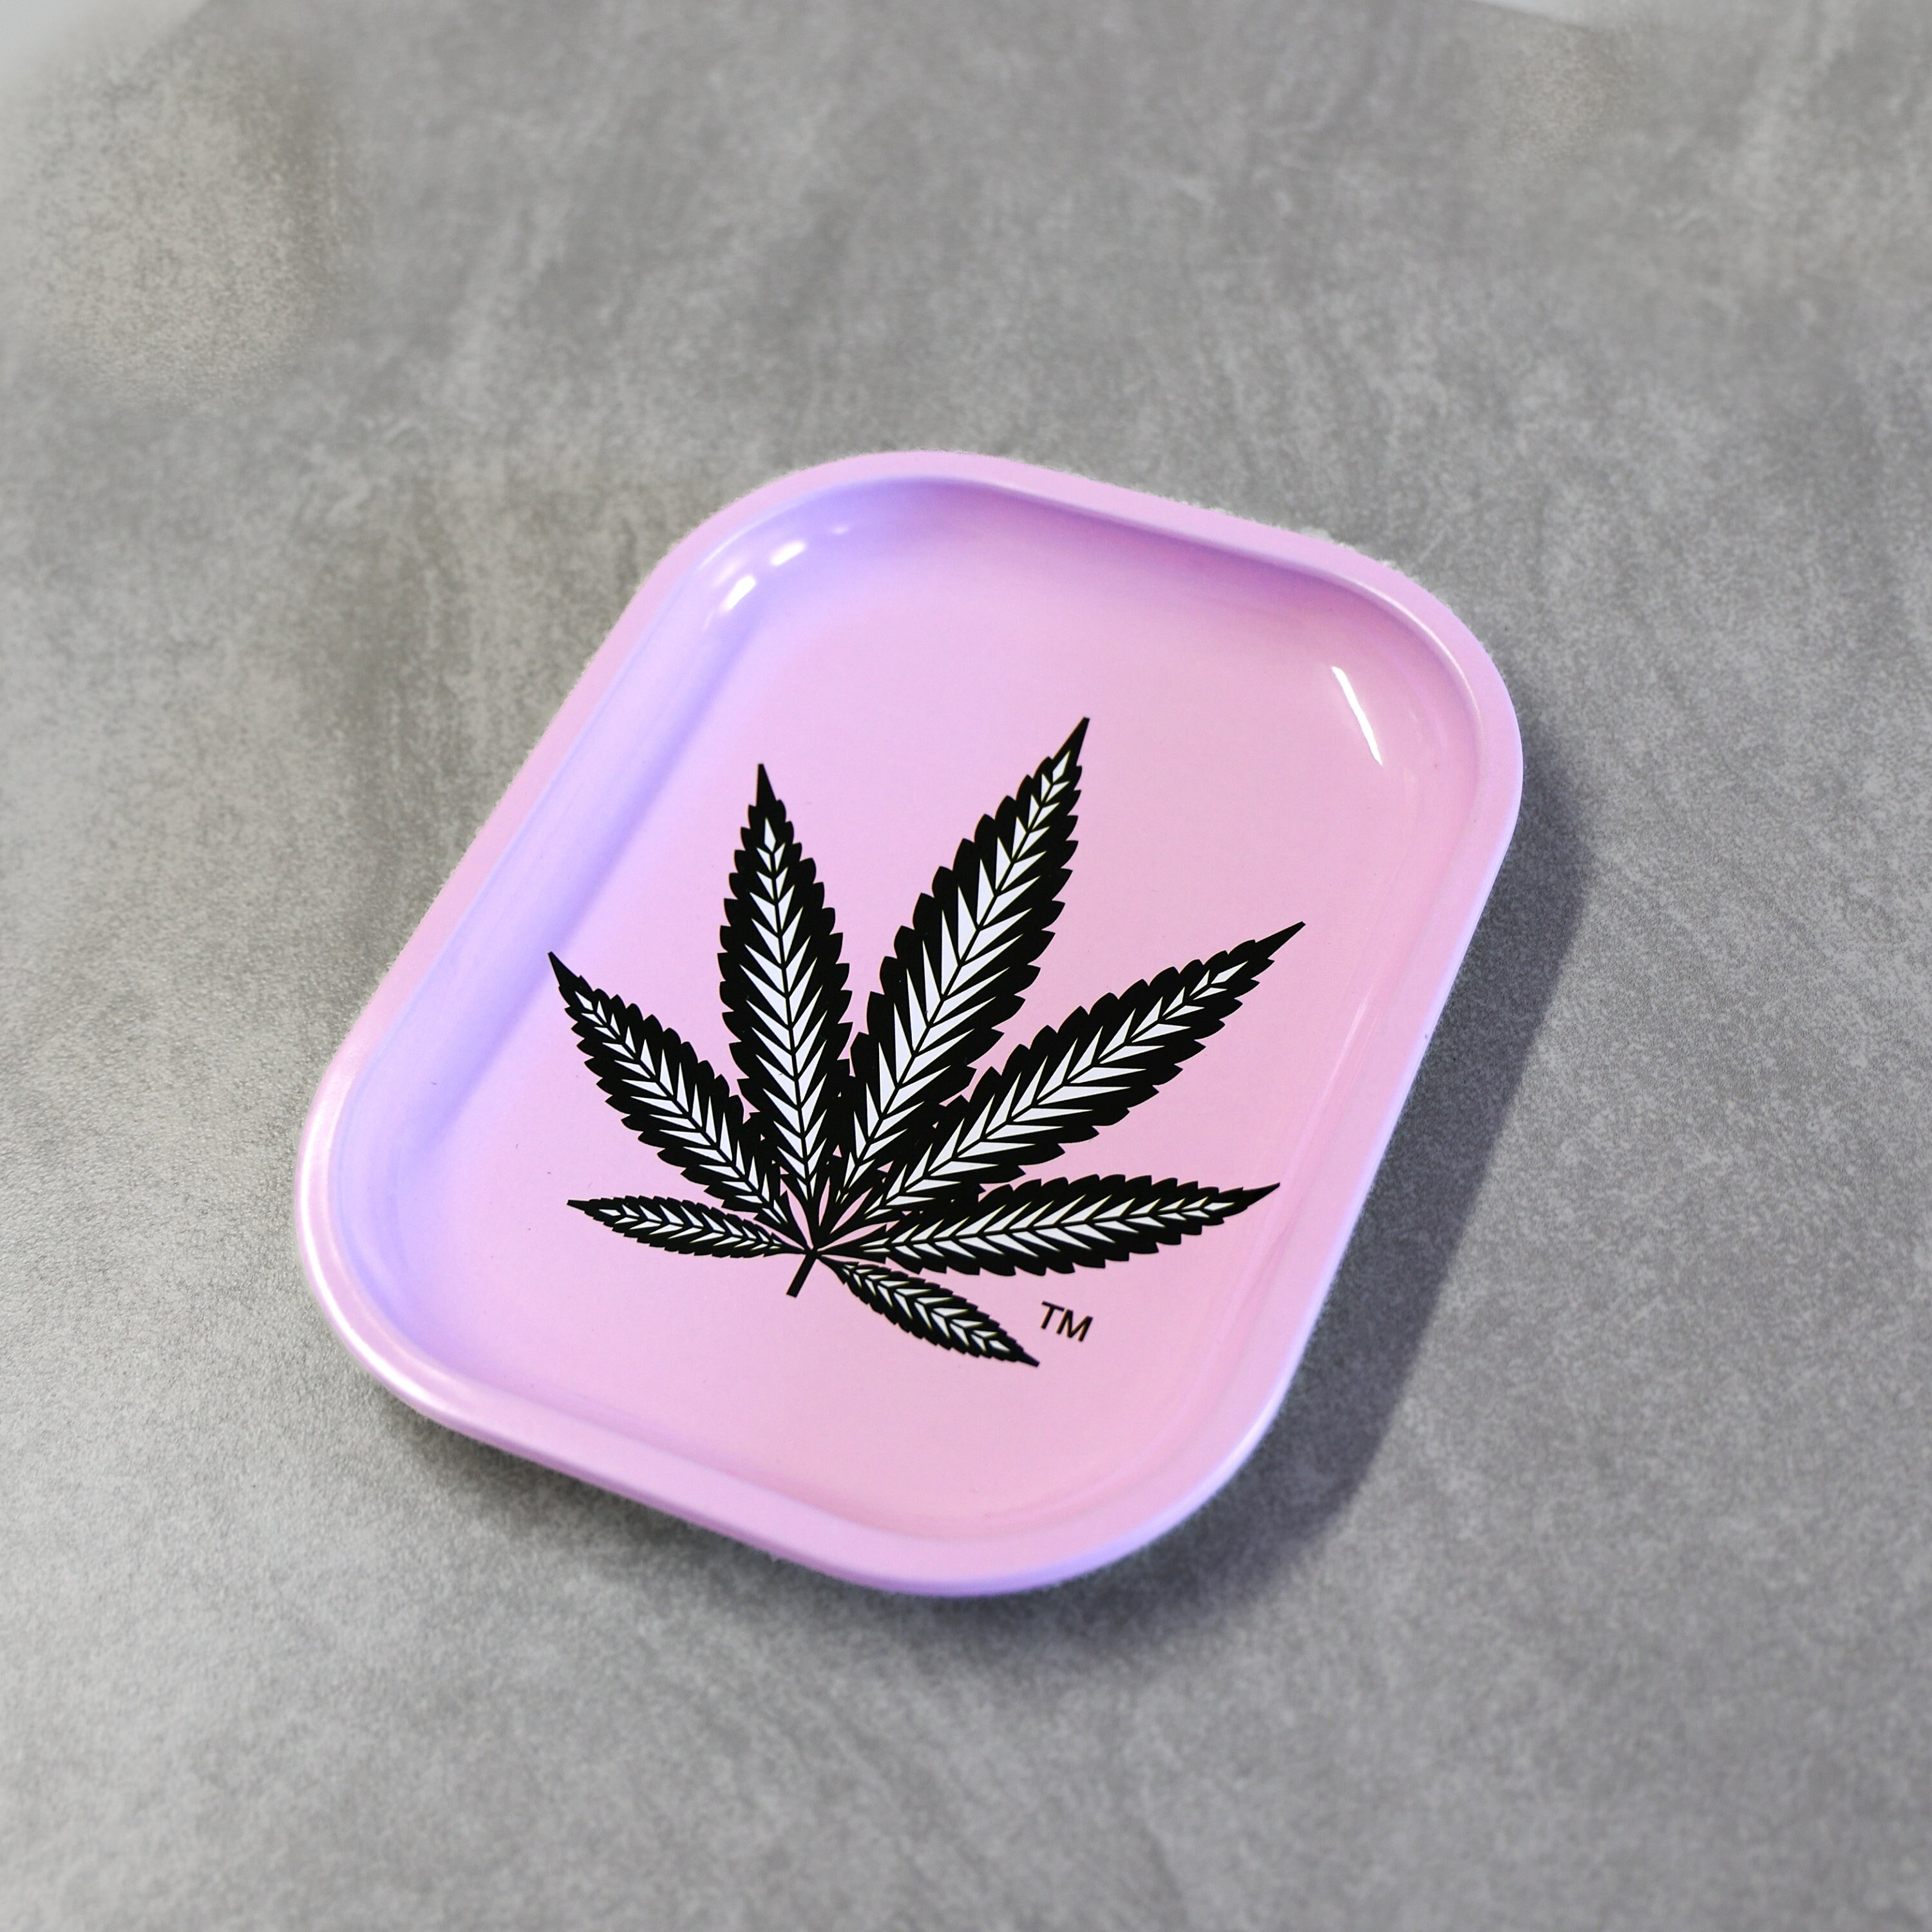 Cute Rolling Tray Girly - Blue Rolling Trays Premium Metal Small Tray with  Design - Unique Gifts for Women Girls Mom, Travel Accessories, 7'' X 5.5